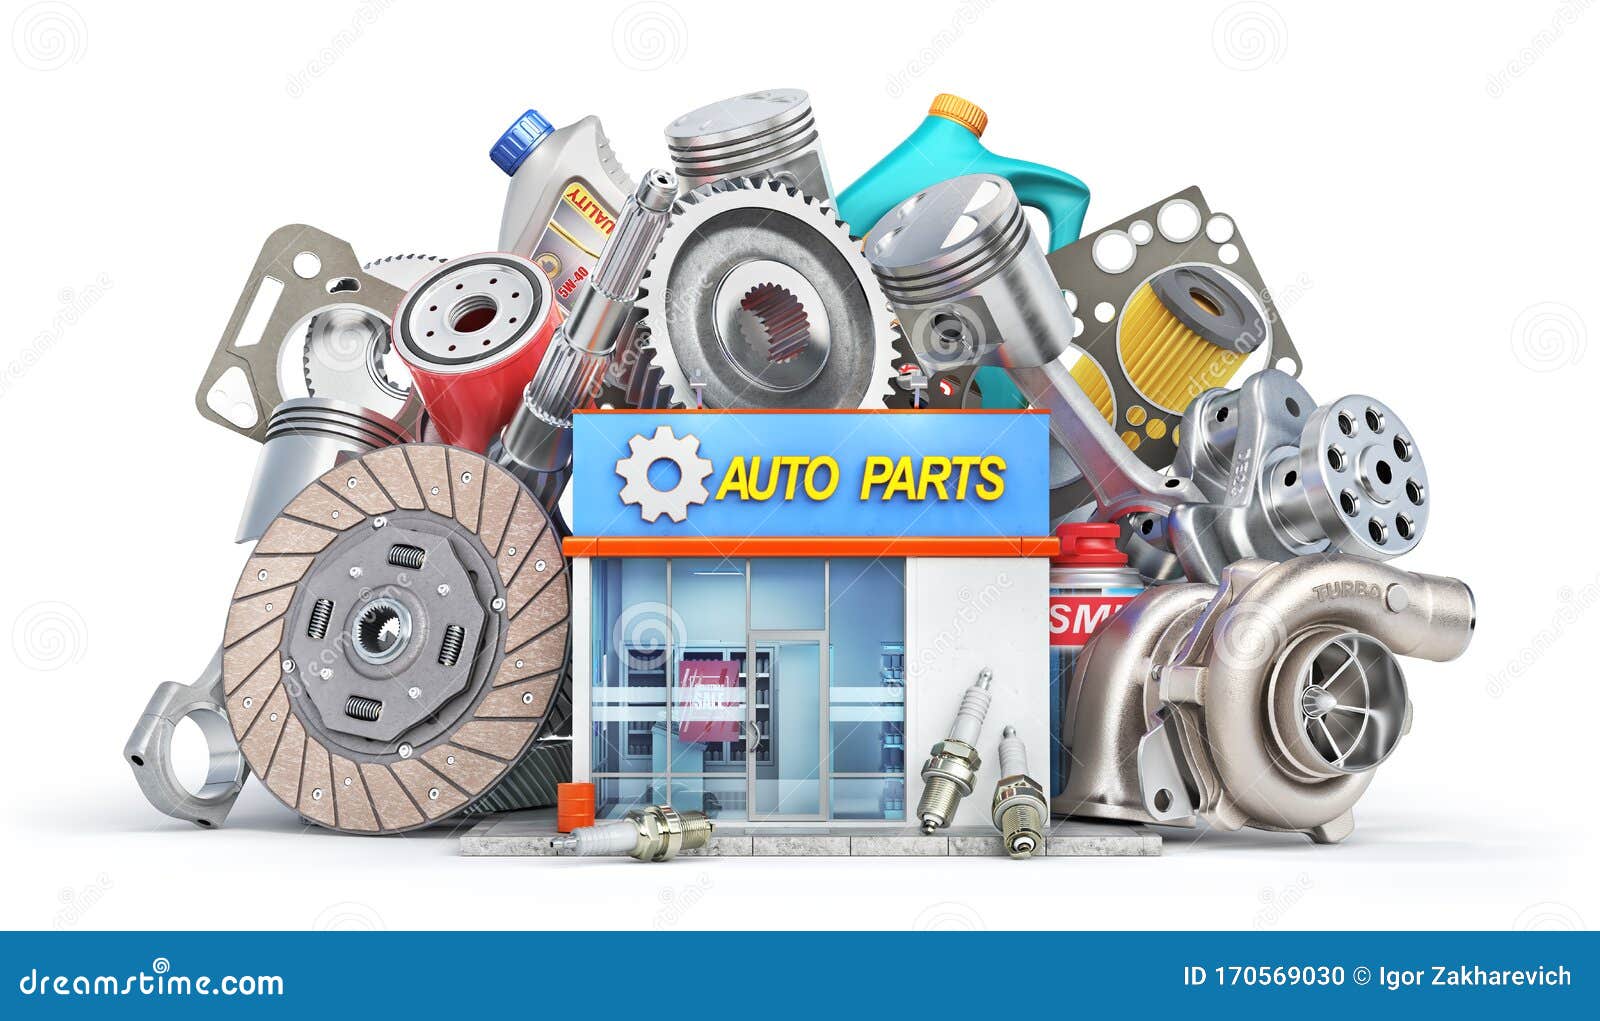 Where to Find Auto Parts in Your City - Eureka Africa Blog